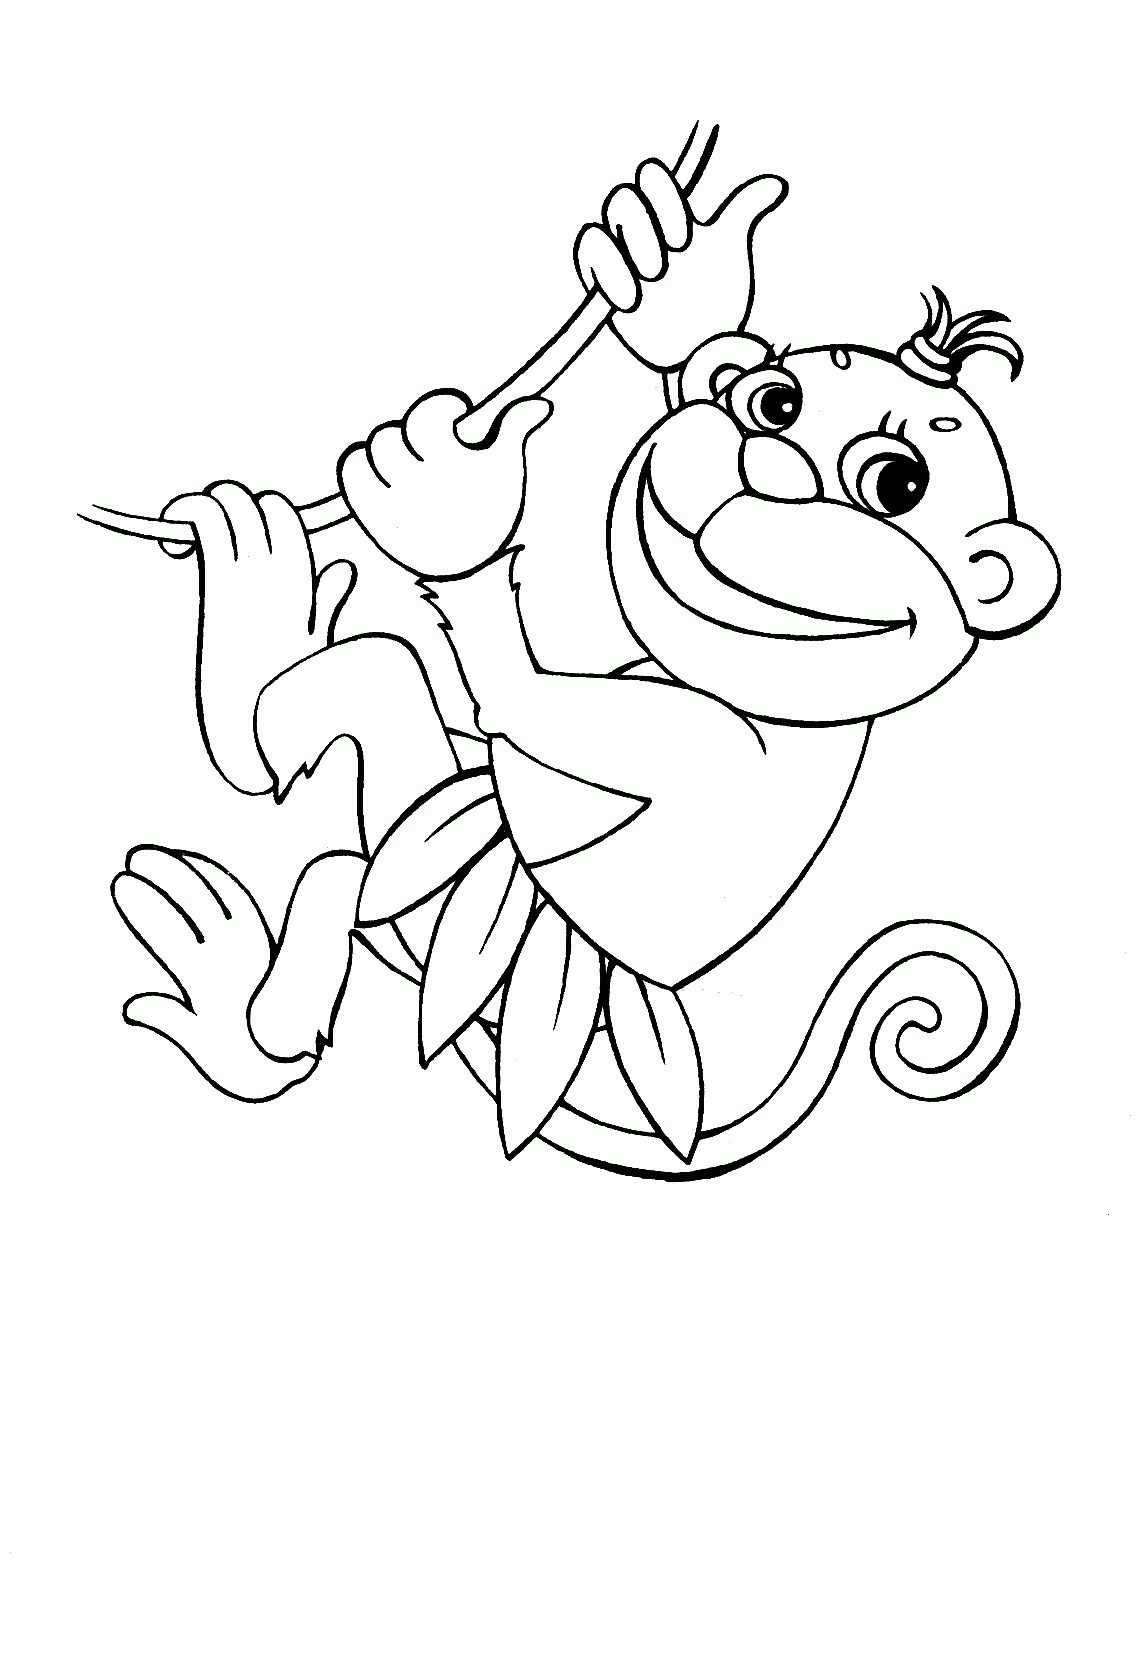 Free Printable Monkey Coloring Pages For Kids - Coloring Home - Free Printable Monkey Coloring Pages